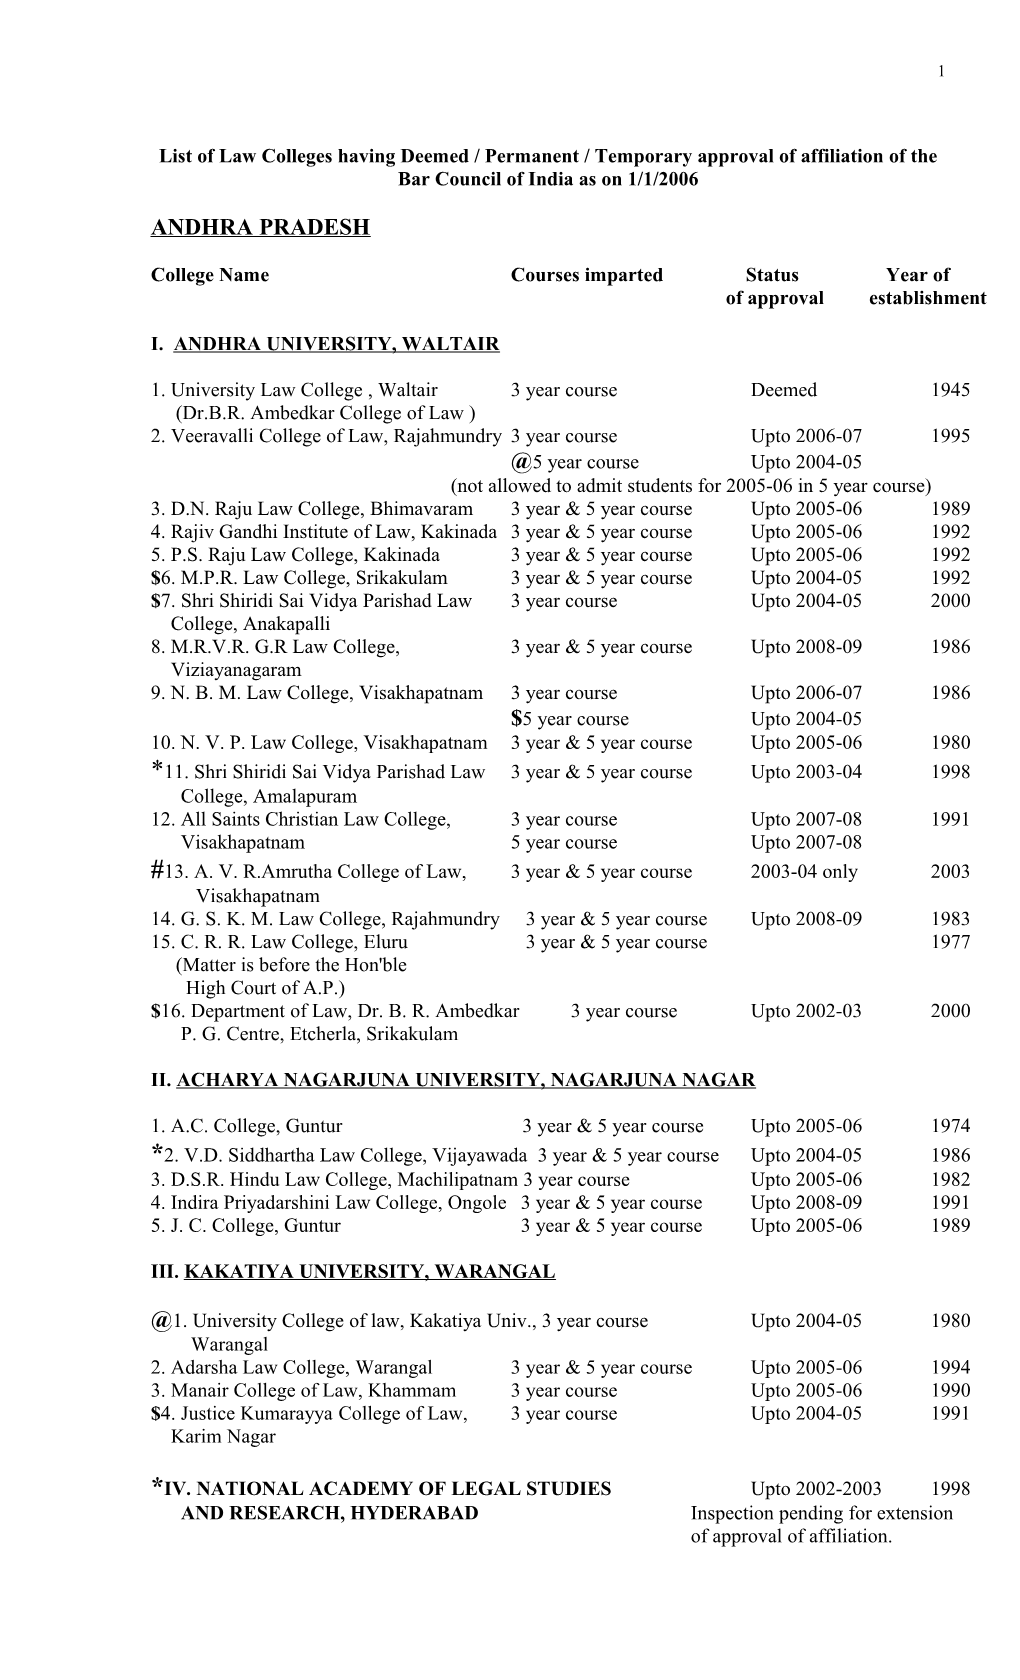 List of Law Colleges Having Permanent / Temporary Approval of Affiliation of the Bar Council